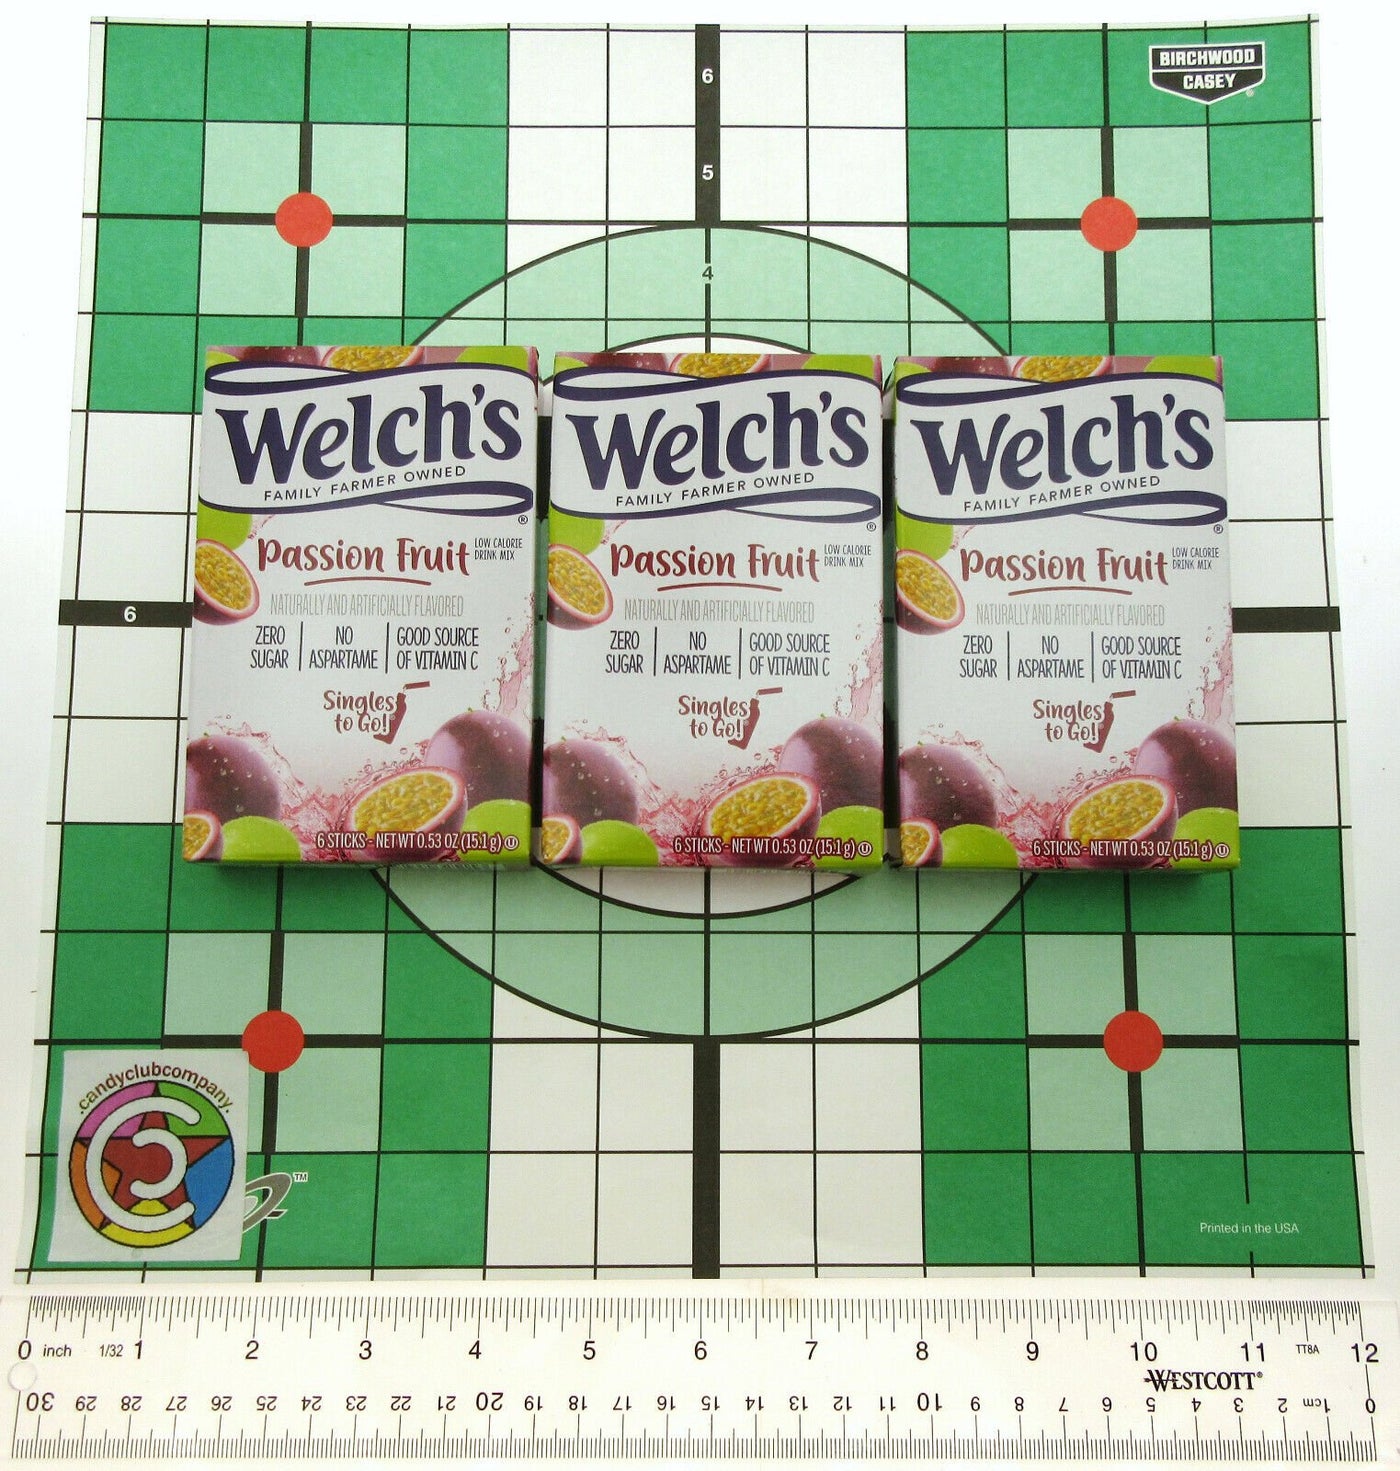 Welch's Passion Fruit ~ Packets ~ Low Calorie ~ Drink Mix ~ Lot of 3